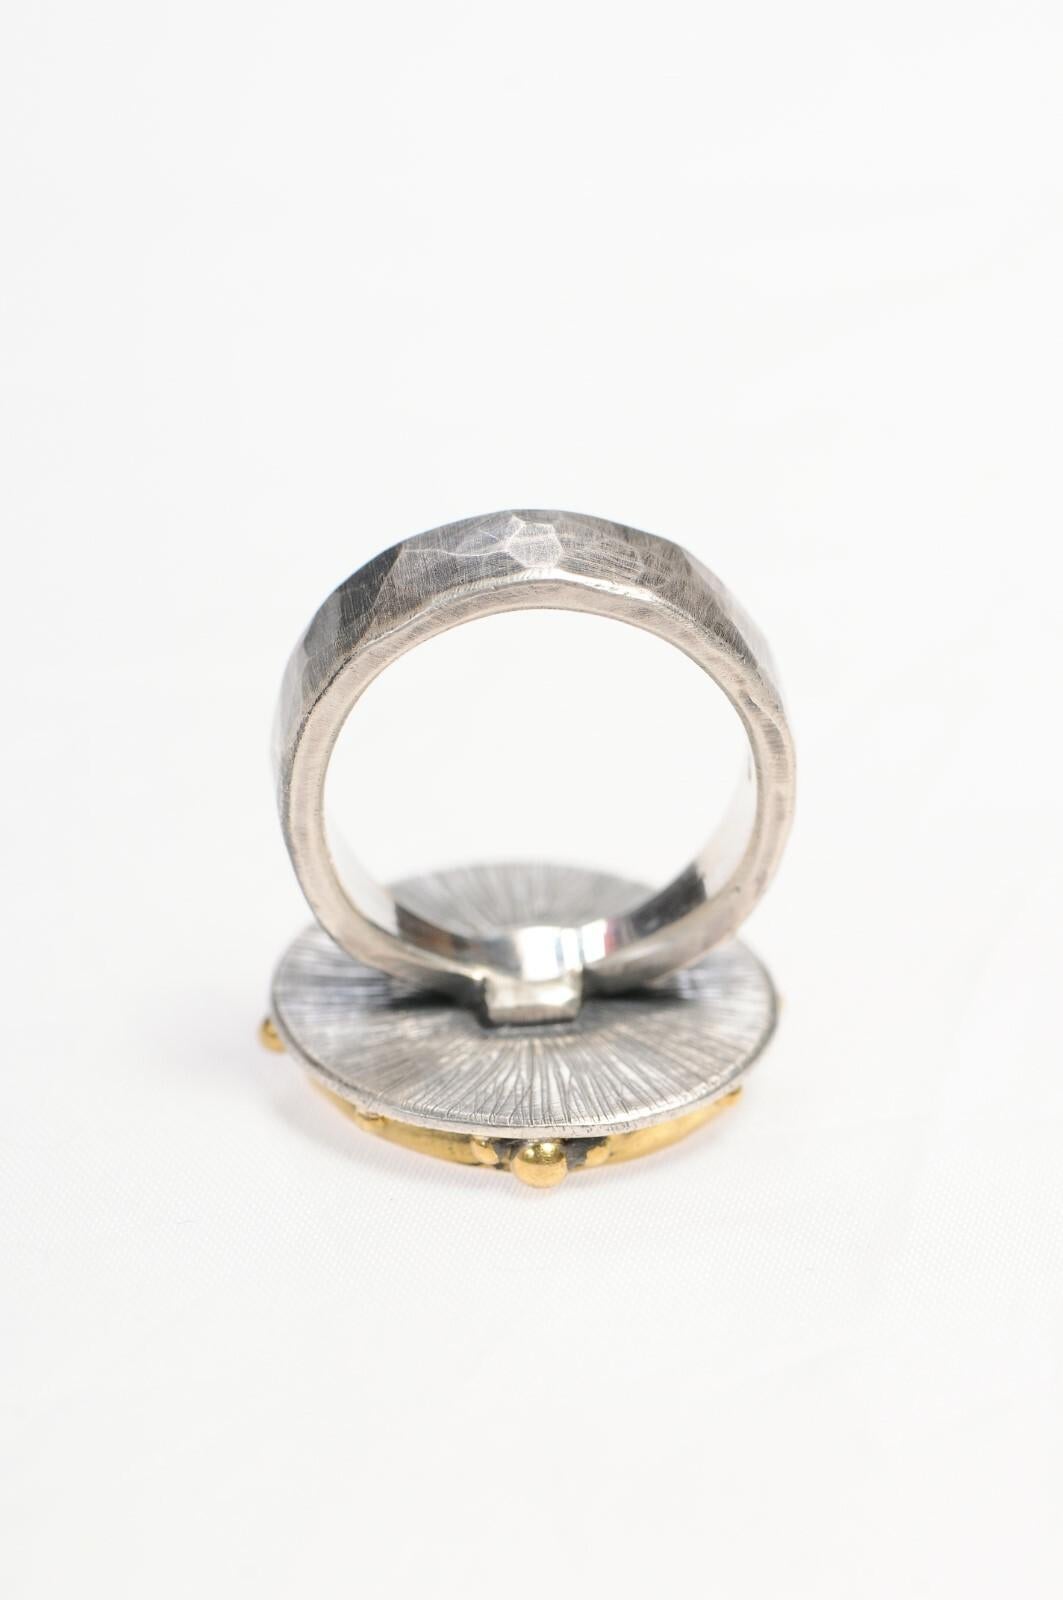 Owl Drachm Ring in 22k & sterling silver For Sale 2